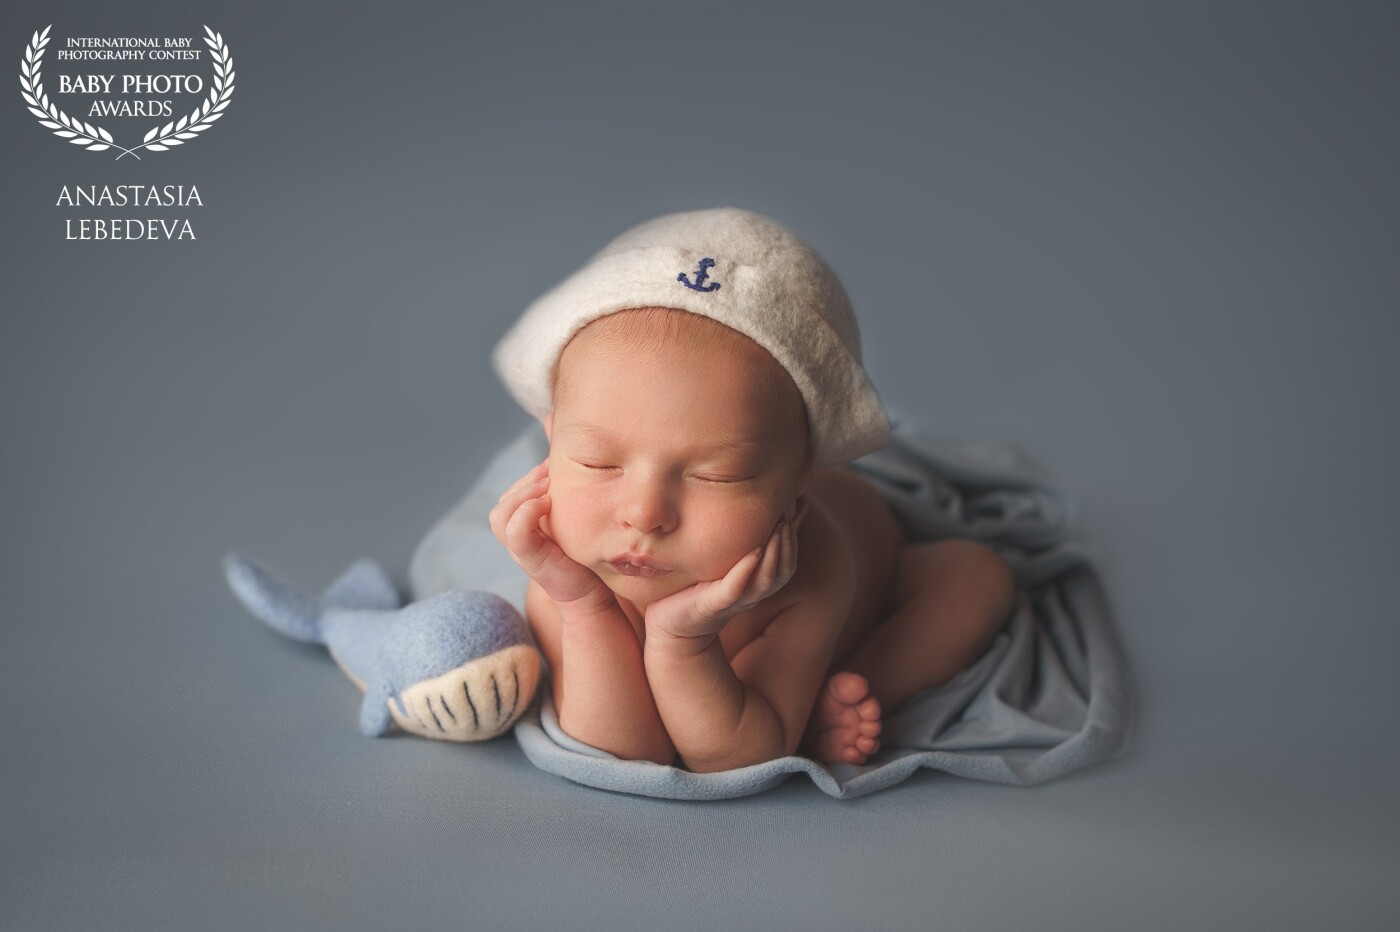 Tadmmm ... Wow !!!  I am very happy and glad that my work was chosen again for the next collection.  In this photo, a newborn baby in the form of a brave little sailor who is not afraid of the ocean waters !!!  The kid slept very well throughout the photo session and gave me the froggy pose.